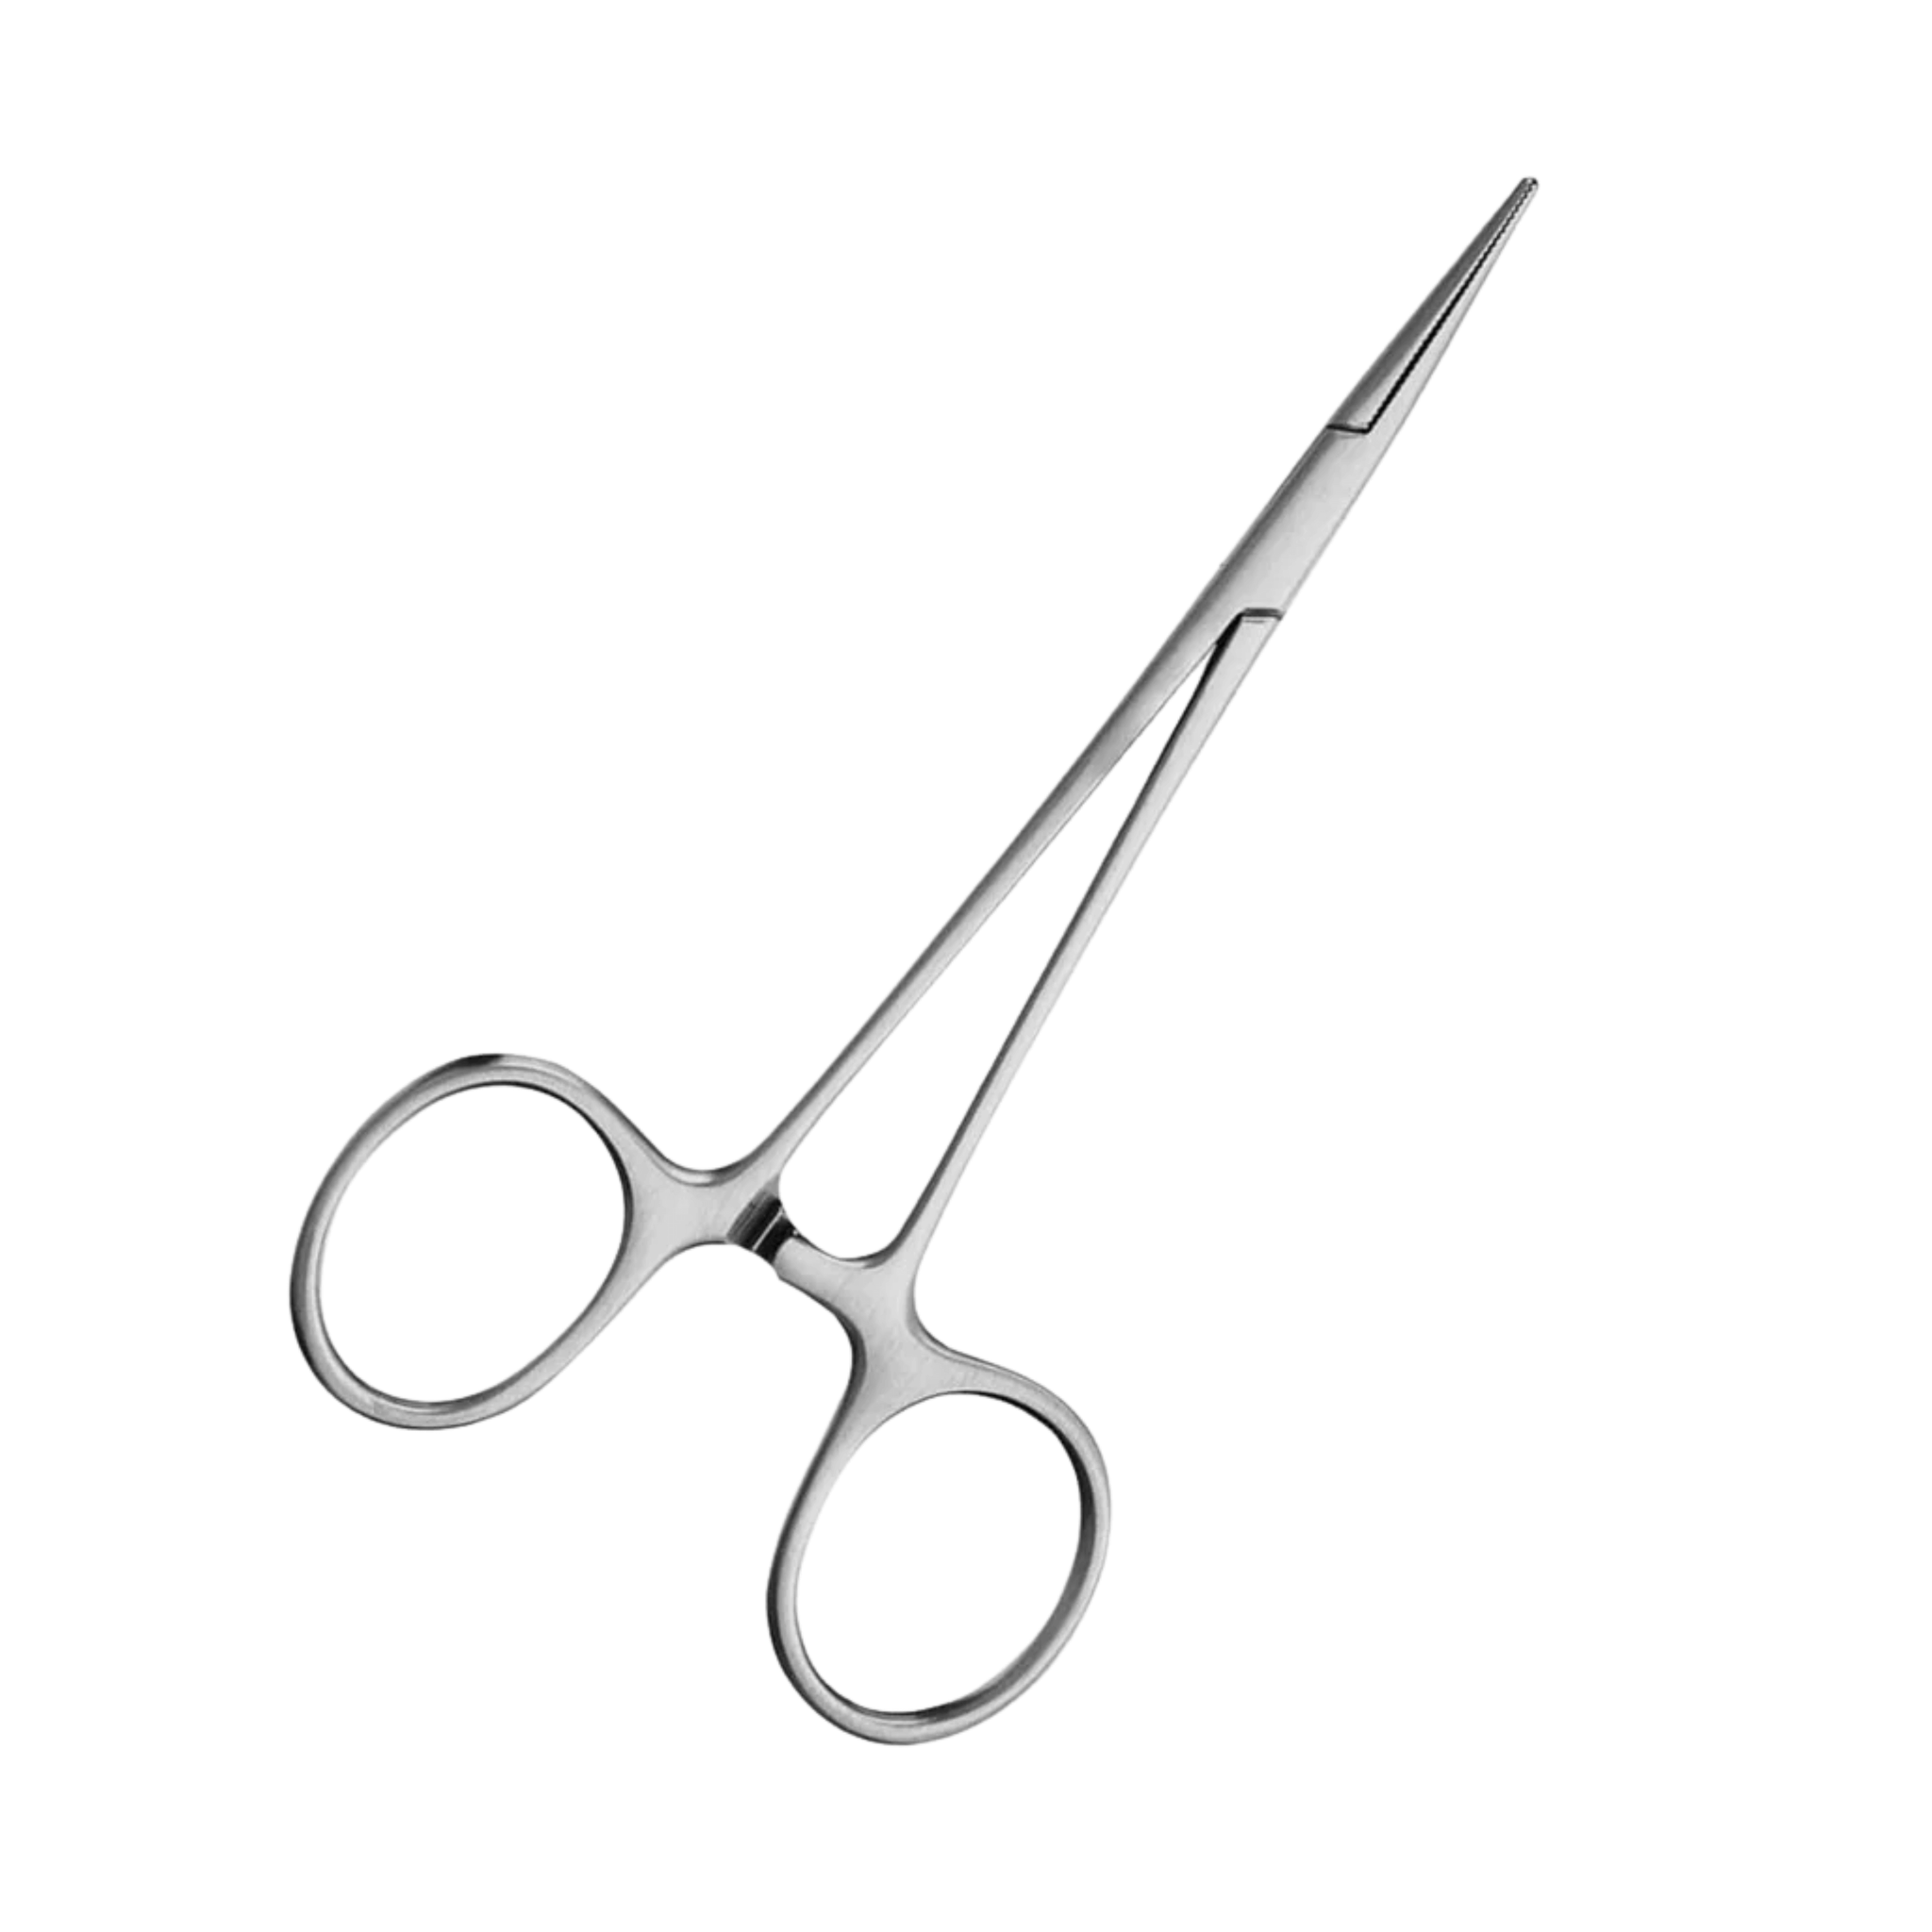 Halsted Mosquito Forceps- Curved, 12.5 cm